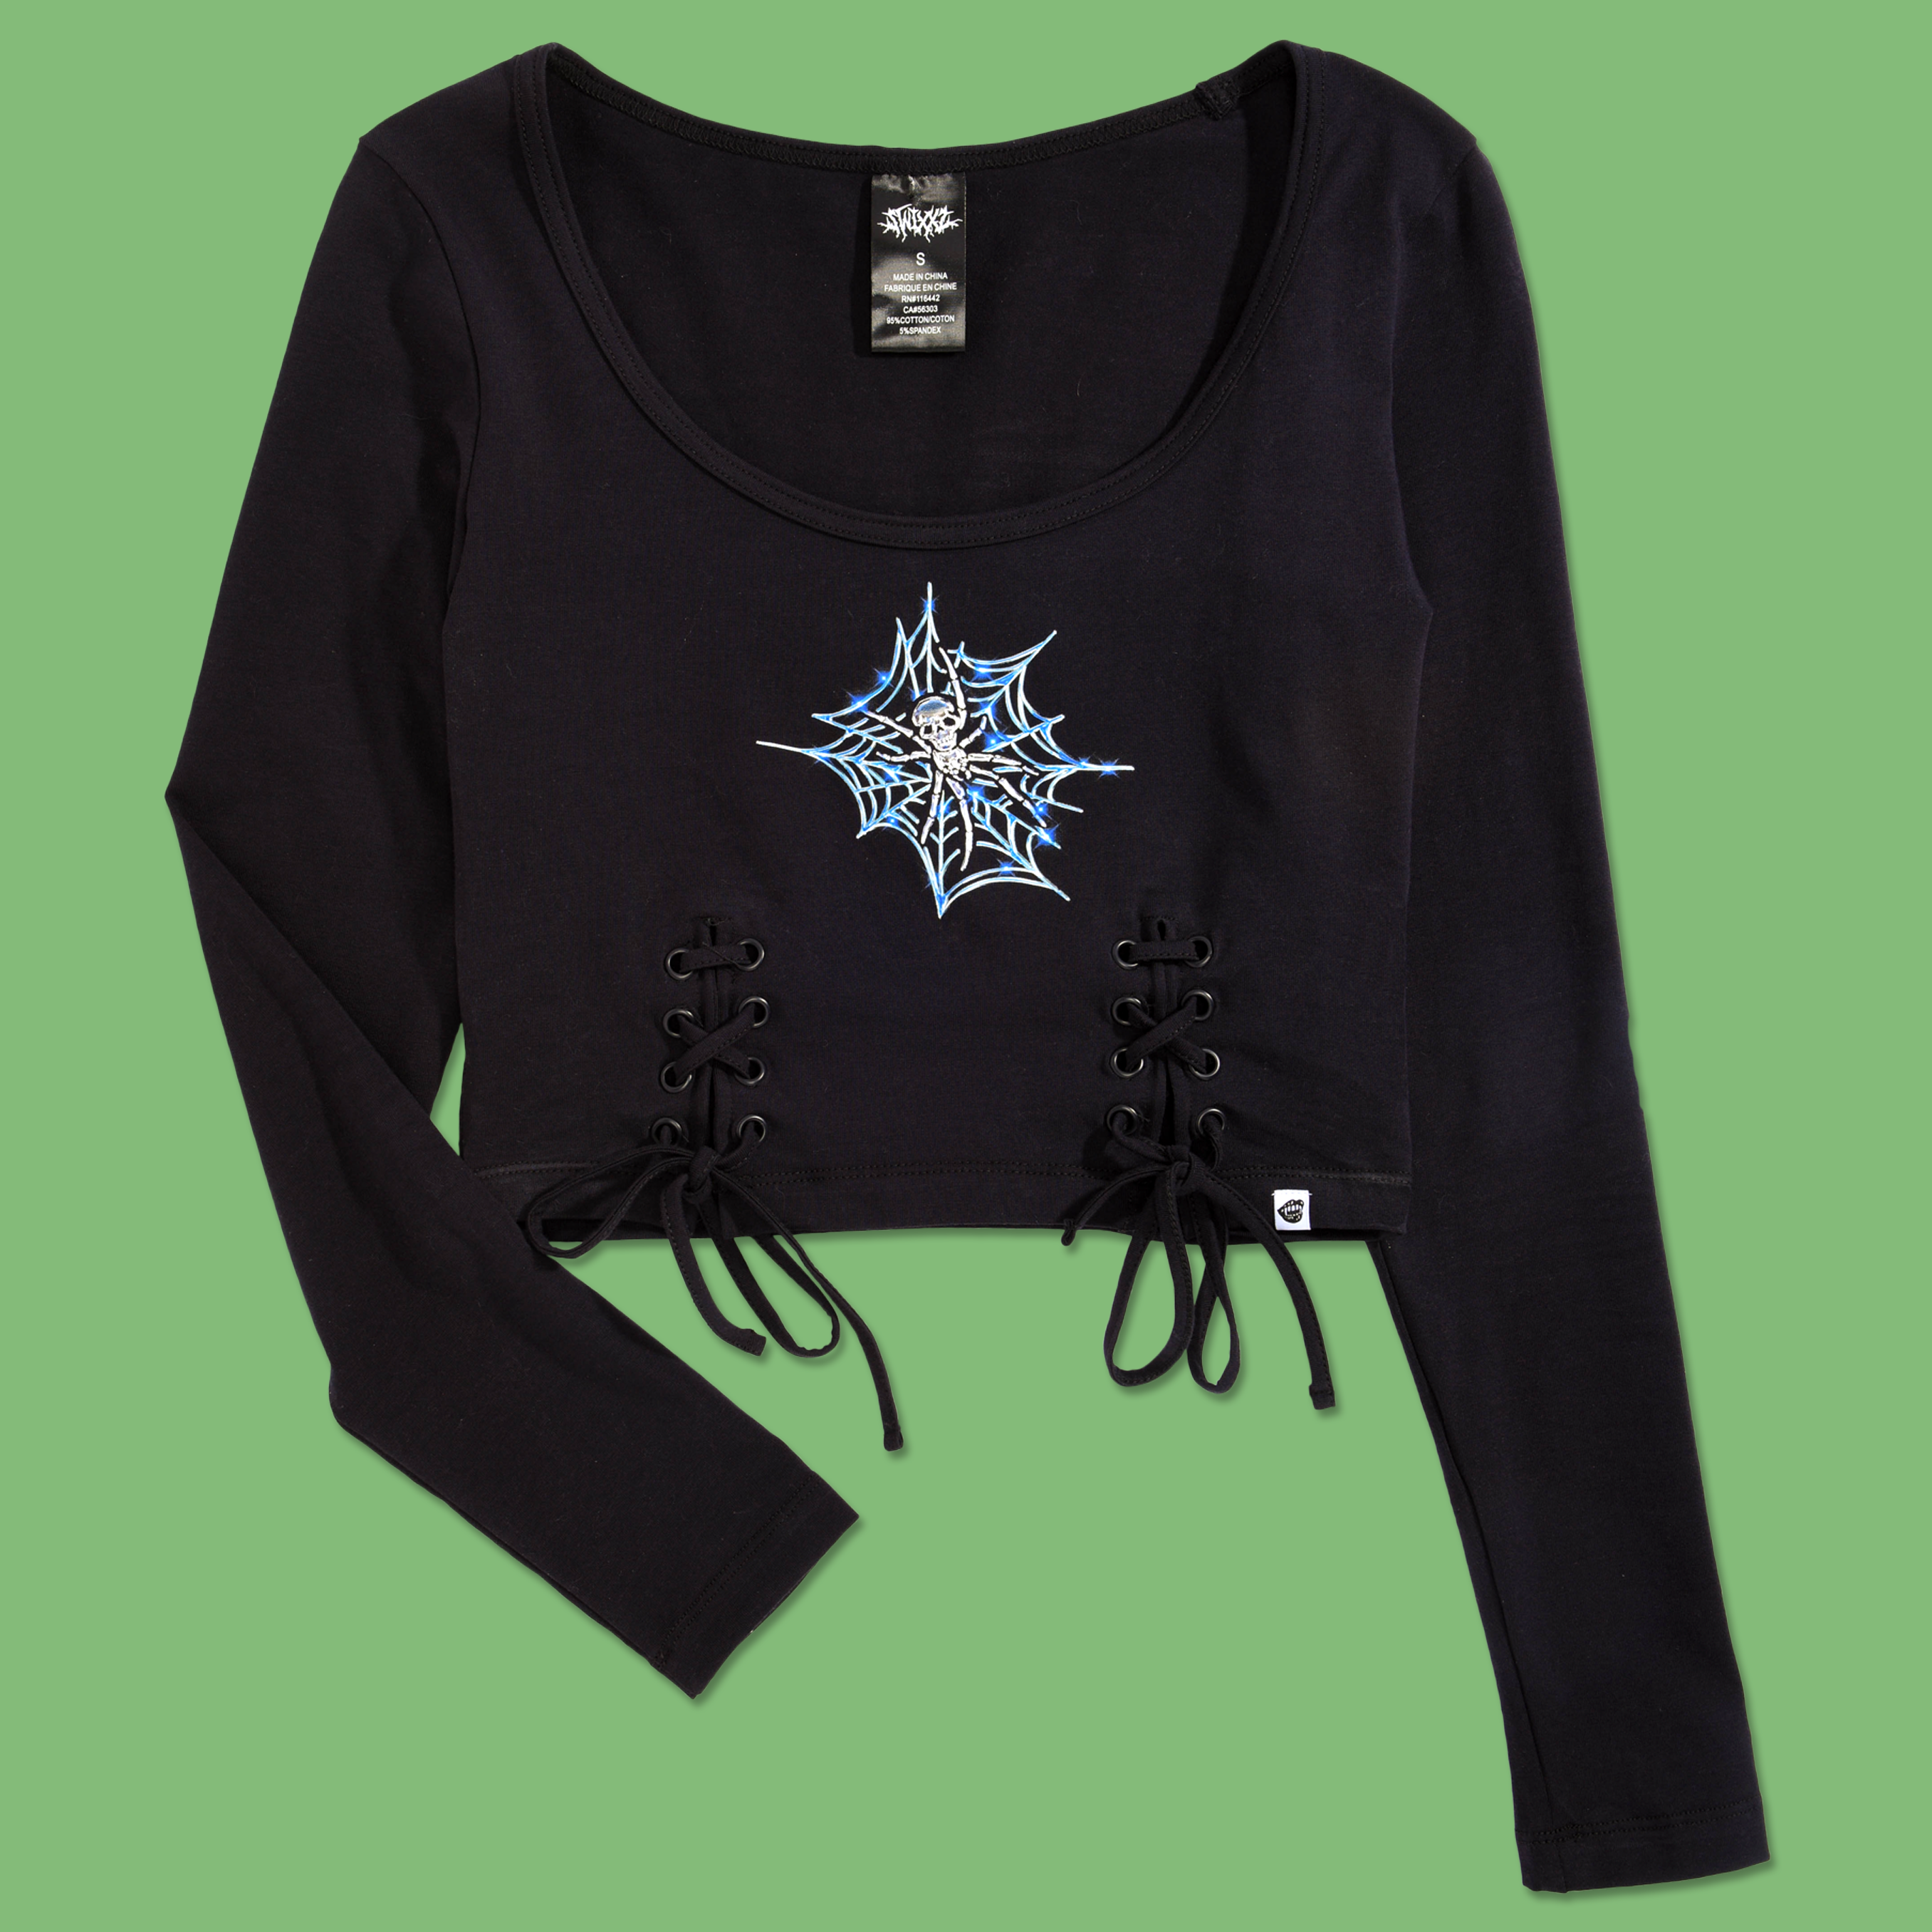 Spider Lace Top from SWIXXZ by Maggie Lindemann - Front